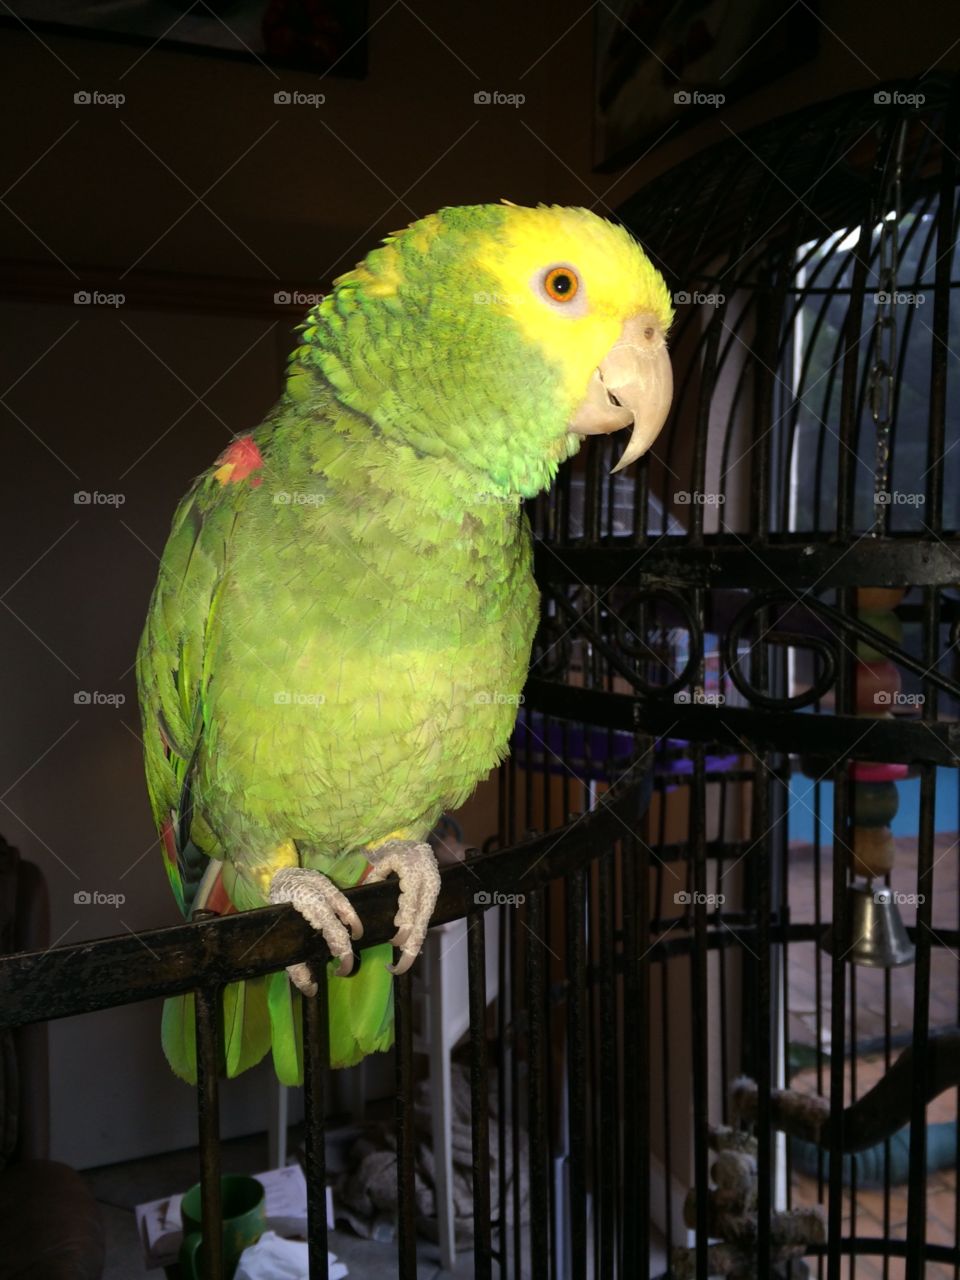 Our beloved Amazon parrot